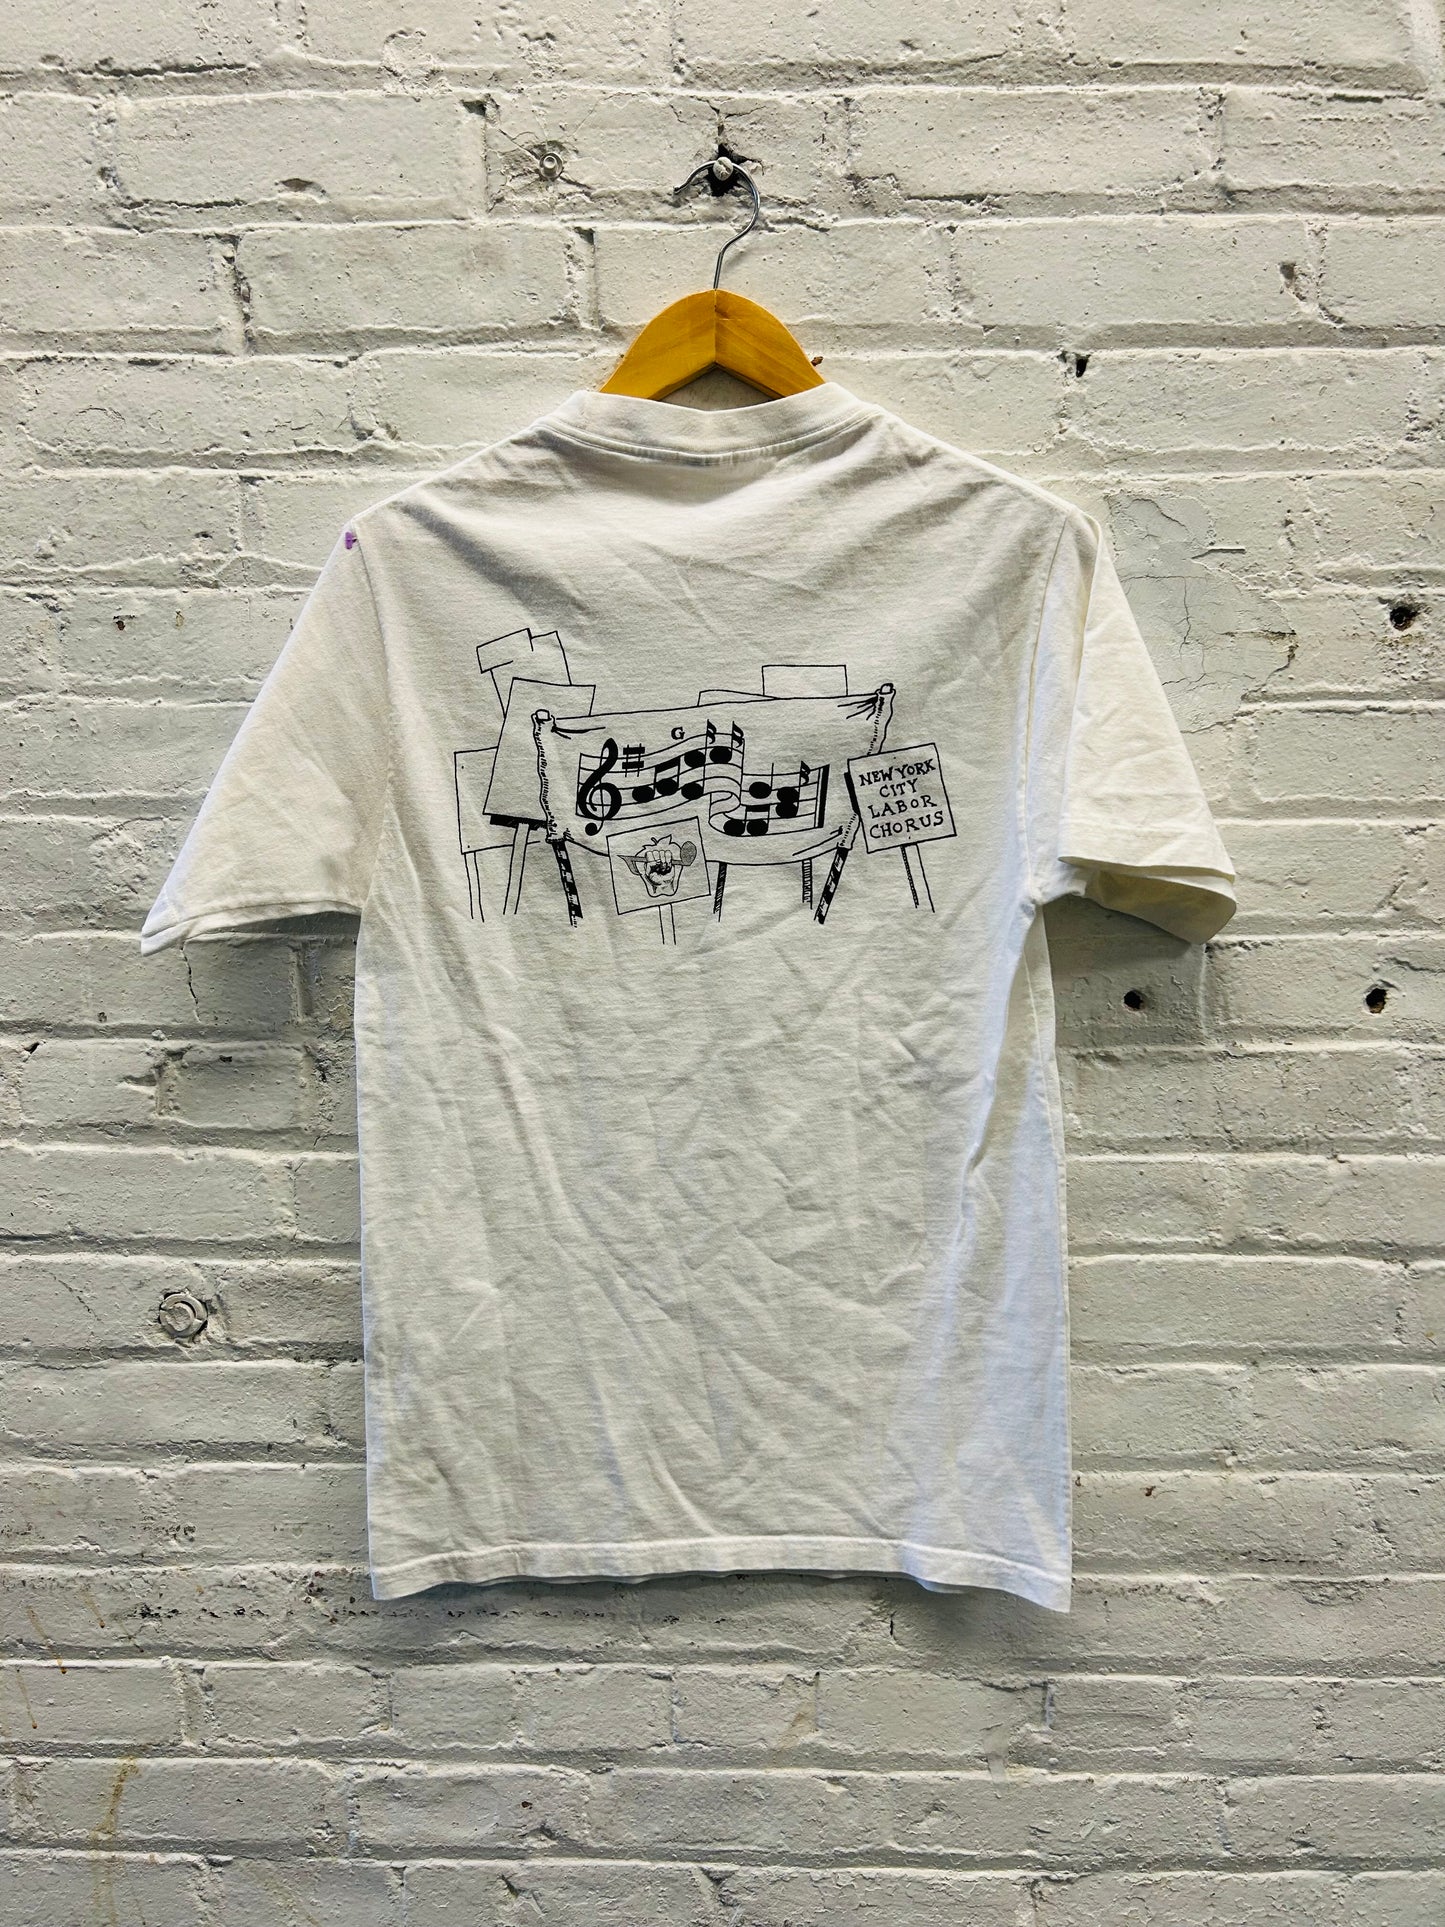 New York Labor Orchestra Tee - Small